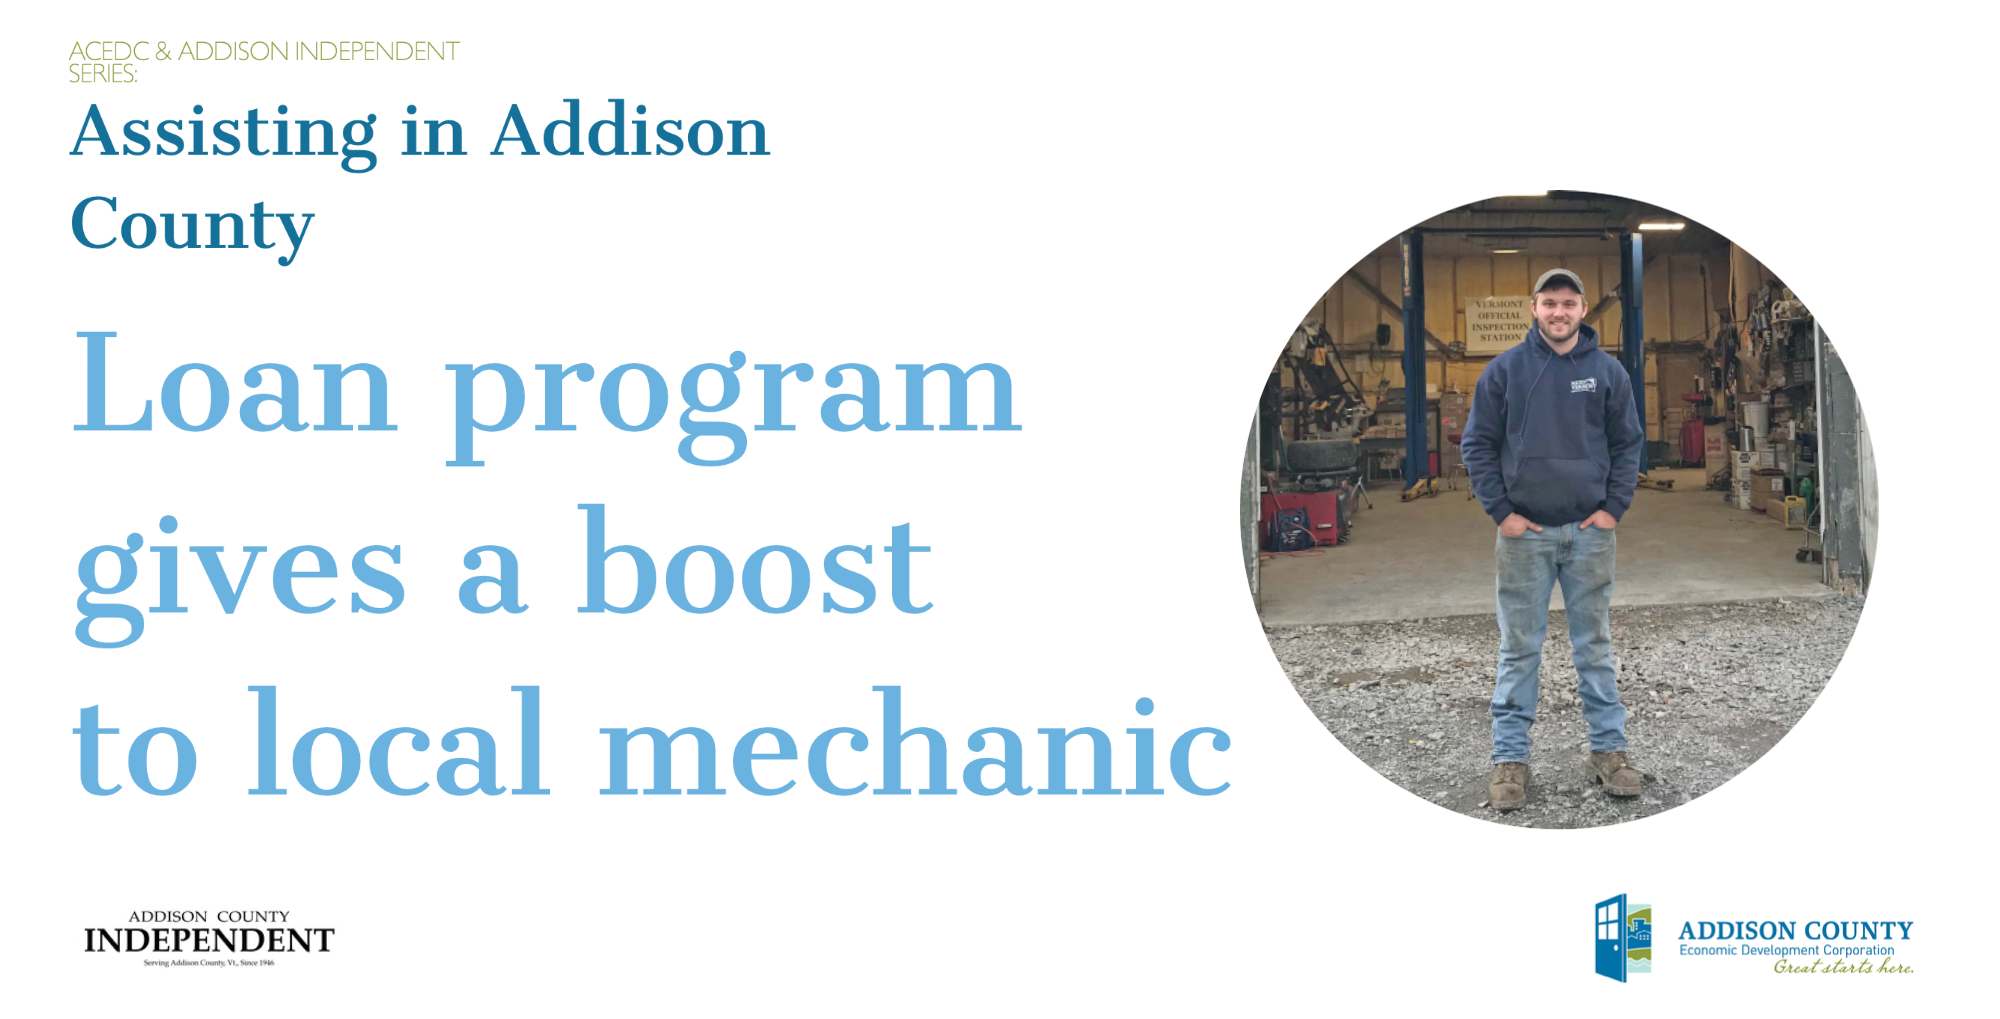 Loan program gives a boost to local mechanic